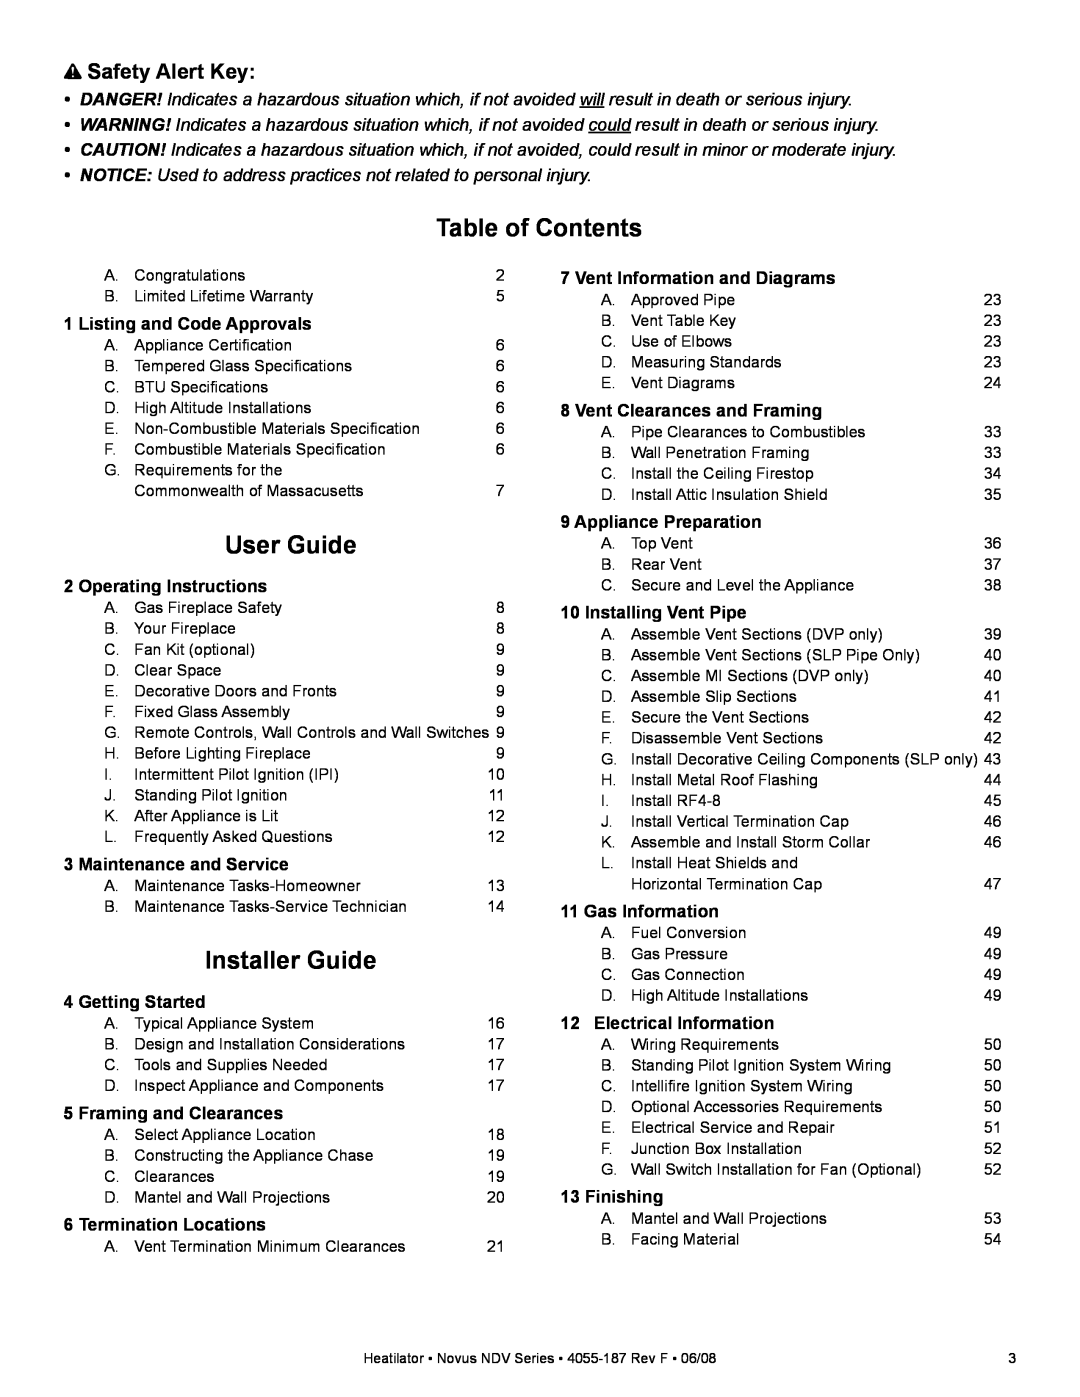 Hearth and Home Technologies NDV4236IL, NDV3630 Table of Contents, User Guide, Installer Guide, Safety Alert Key 